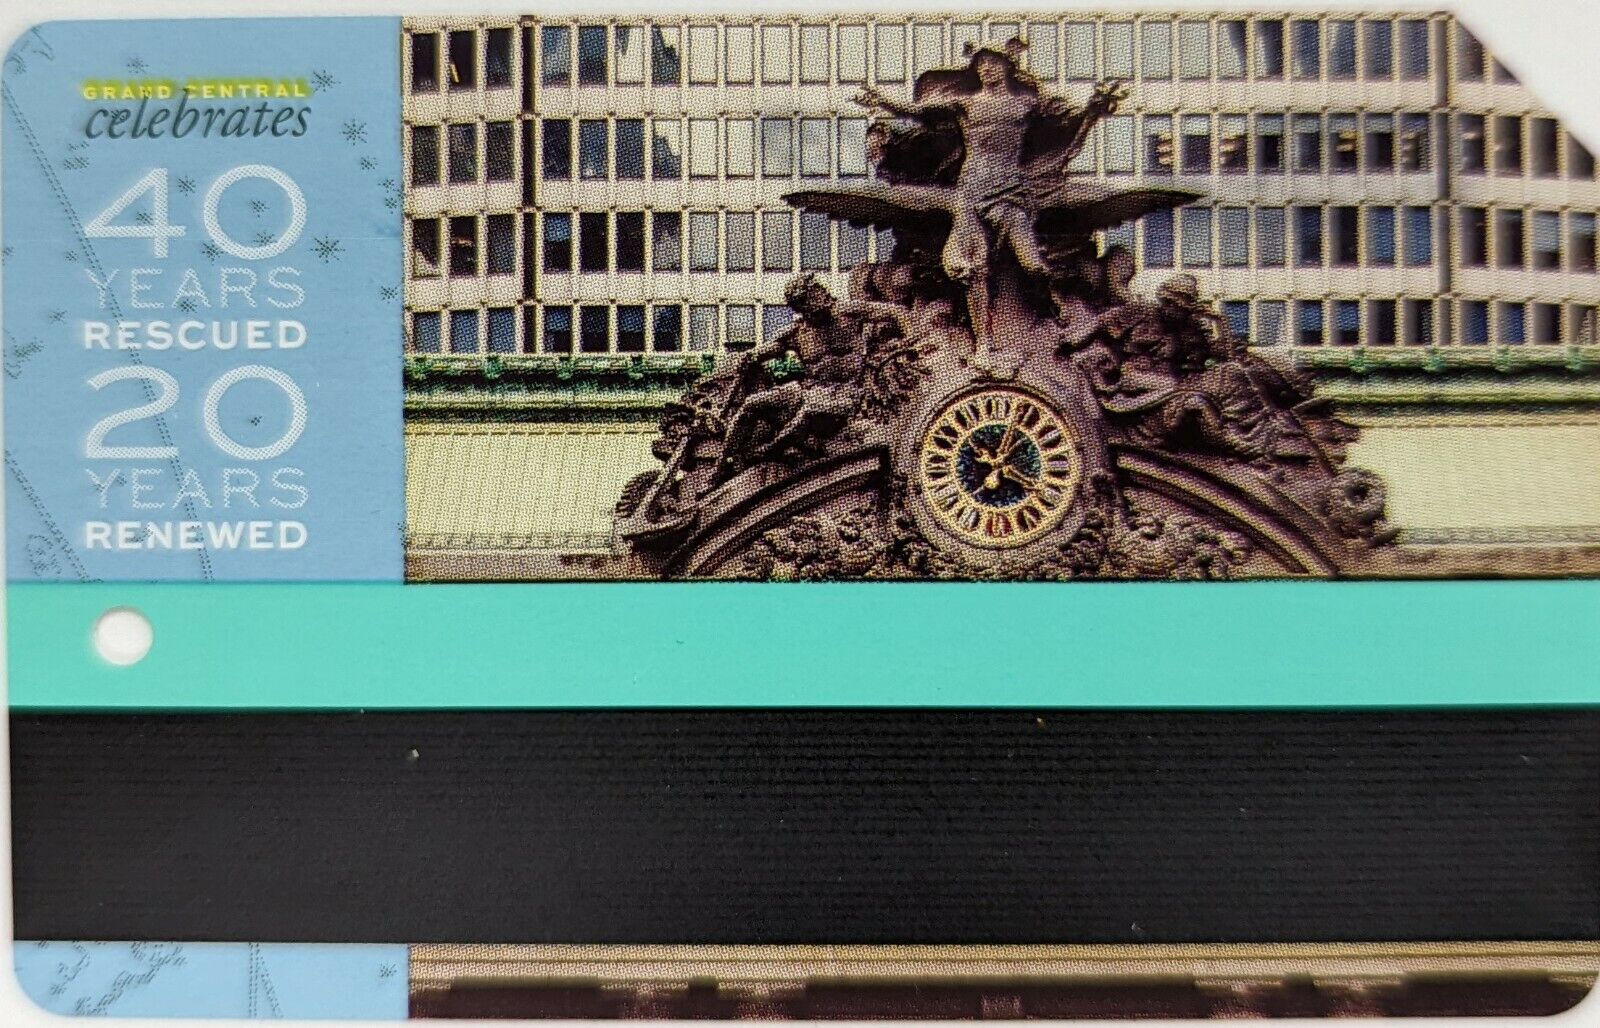 Grand Central 40 Anniversary- NYC MetroCard-Expired, Mint condition